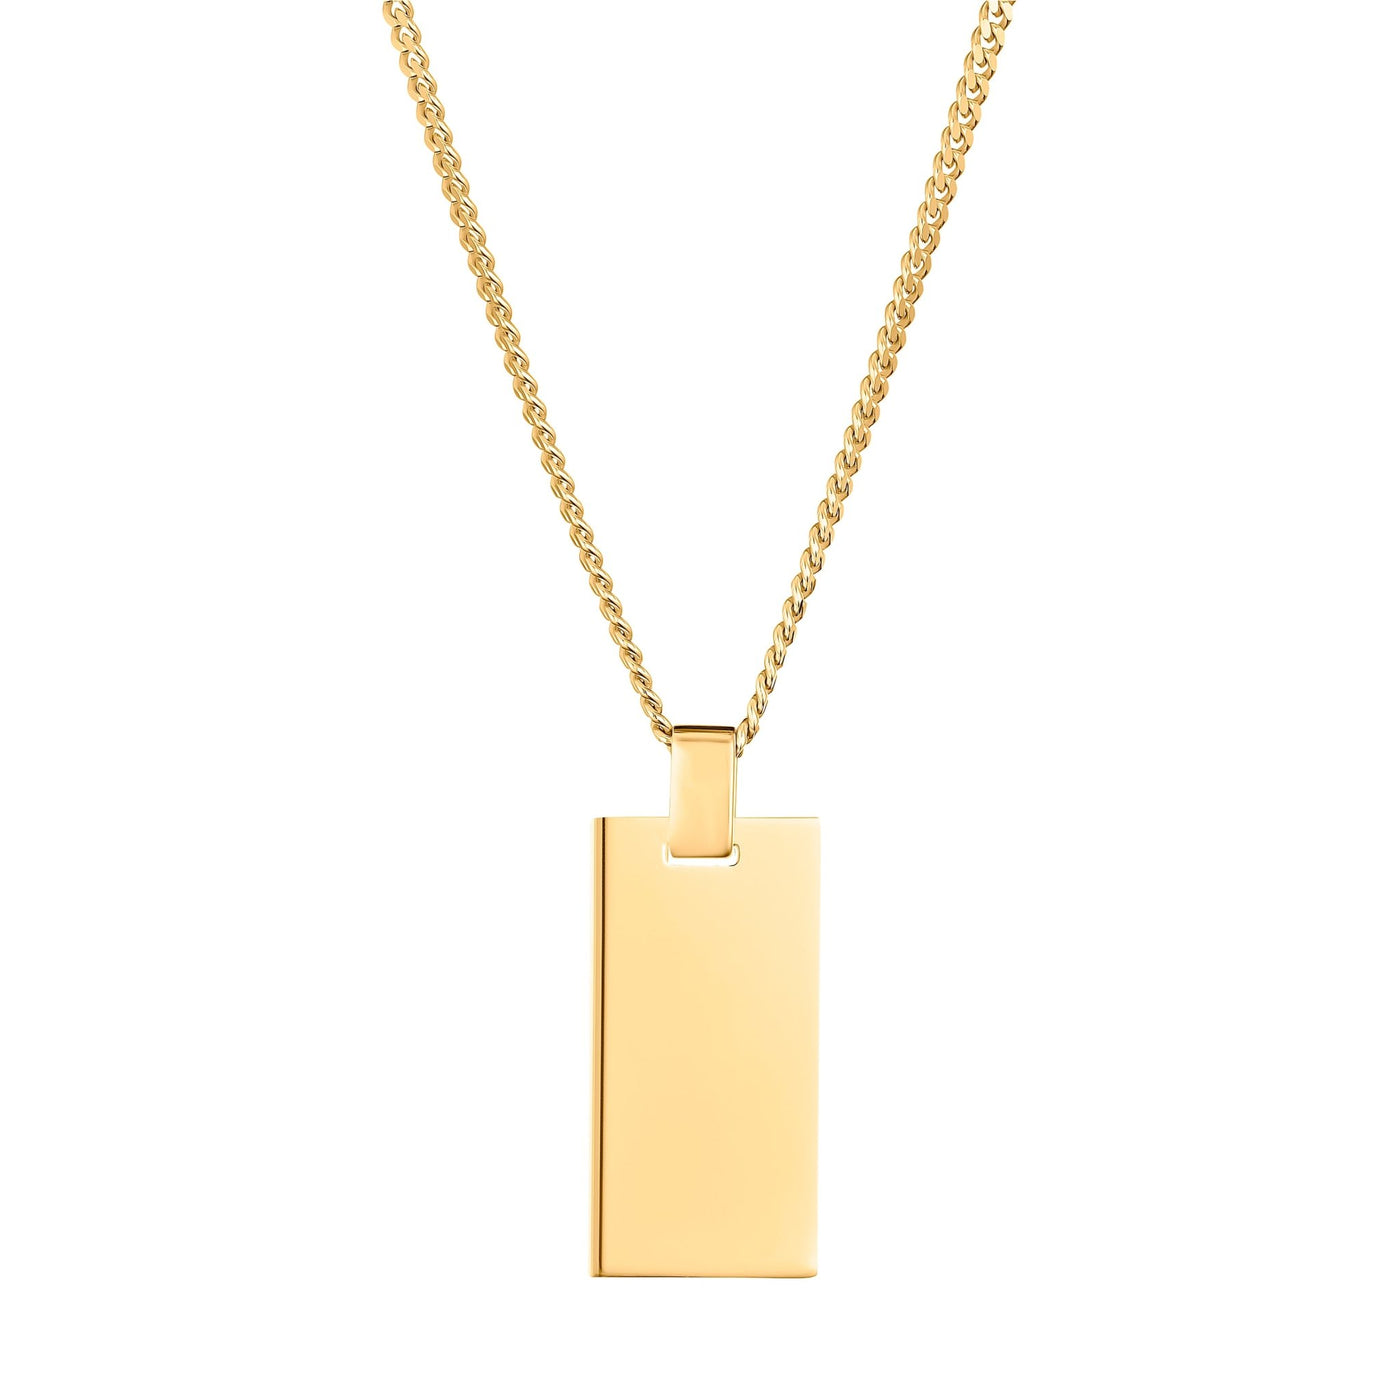 ENGRAVING PLATE RECTANGLE NECKLACE 925 SILVER 18 KARAT GOLD PLATED - IDENTIM®